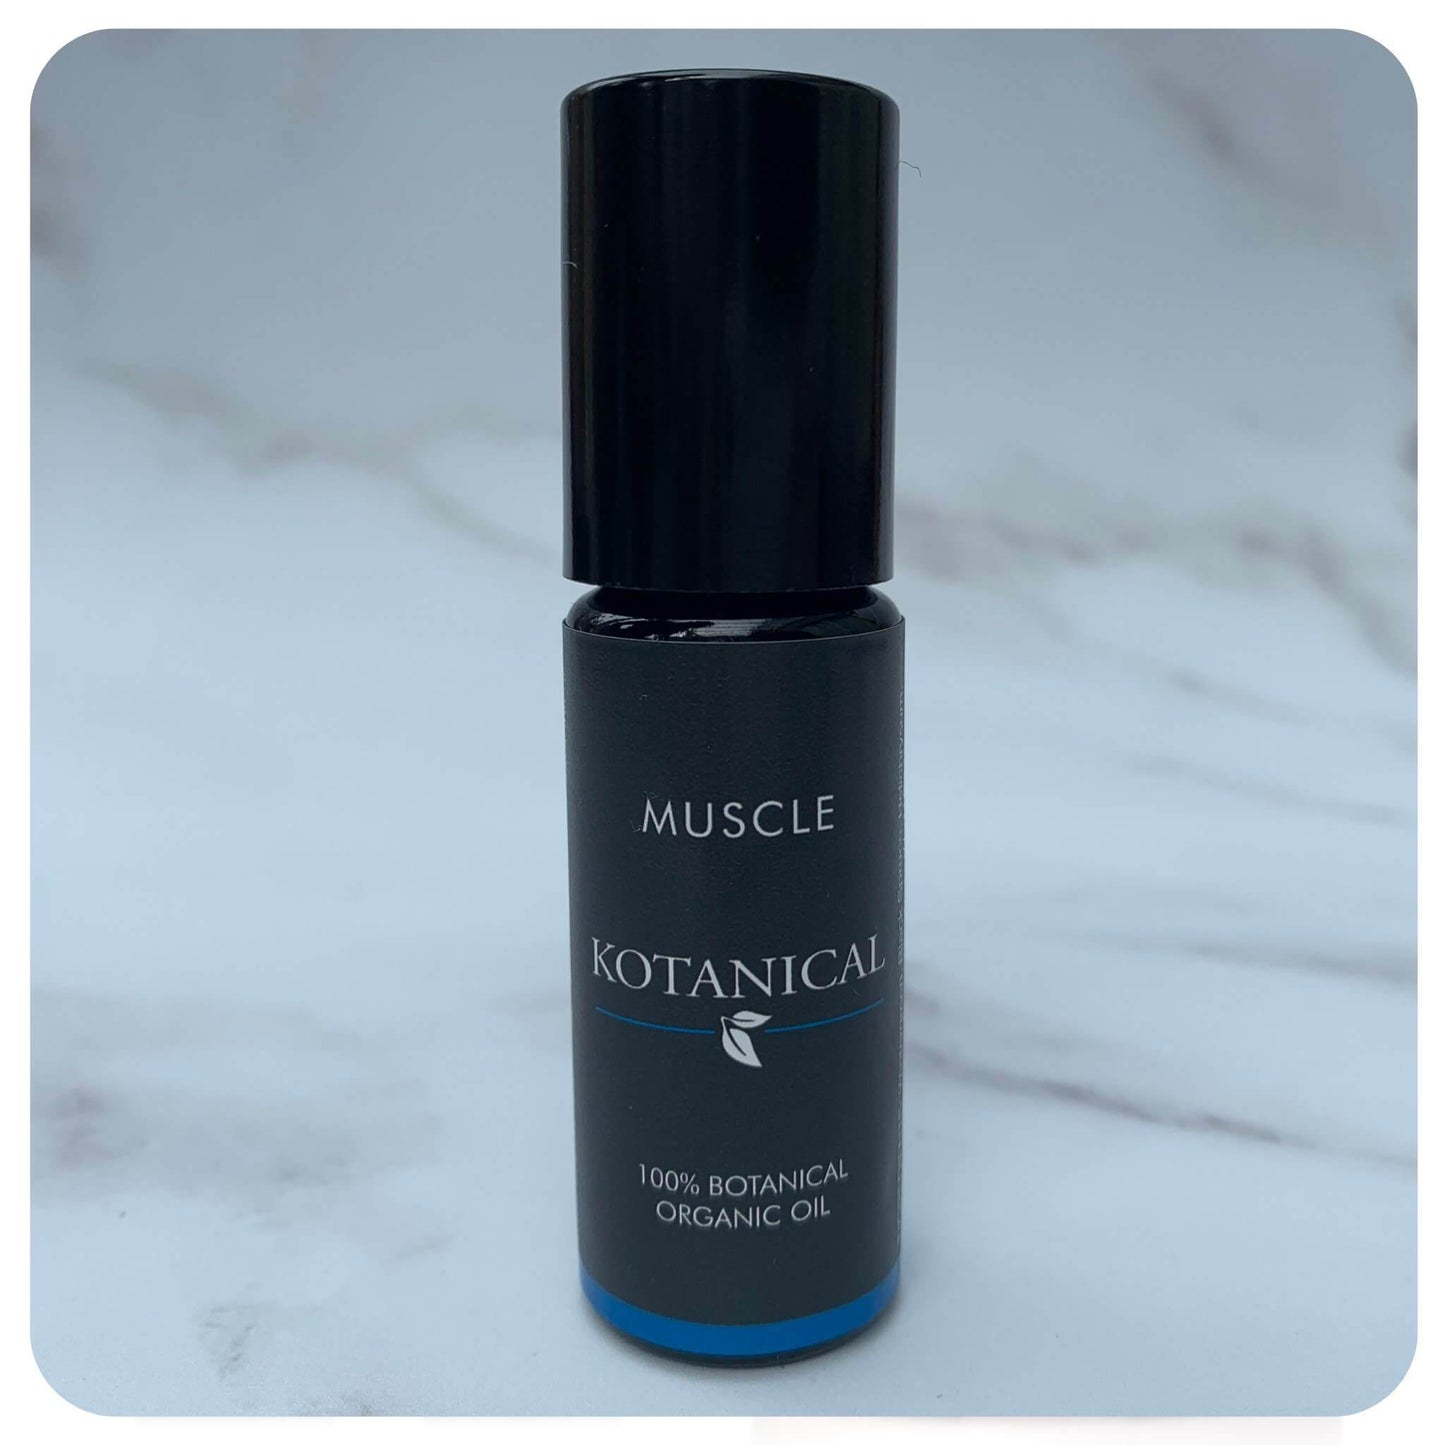 Muscle Rollerball Massage in a Bottle kotanical 